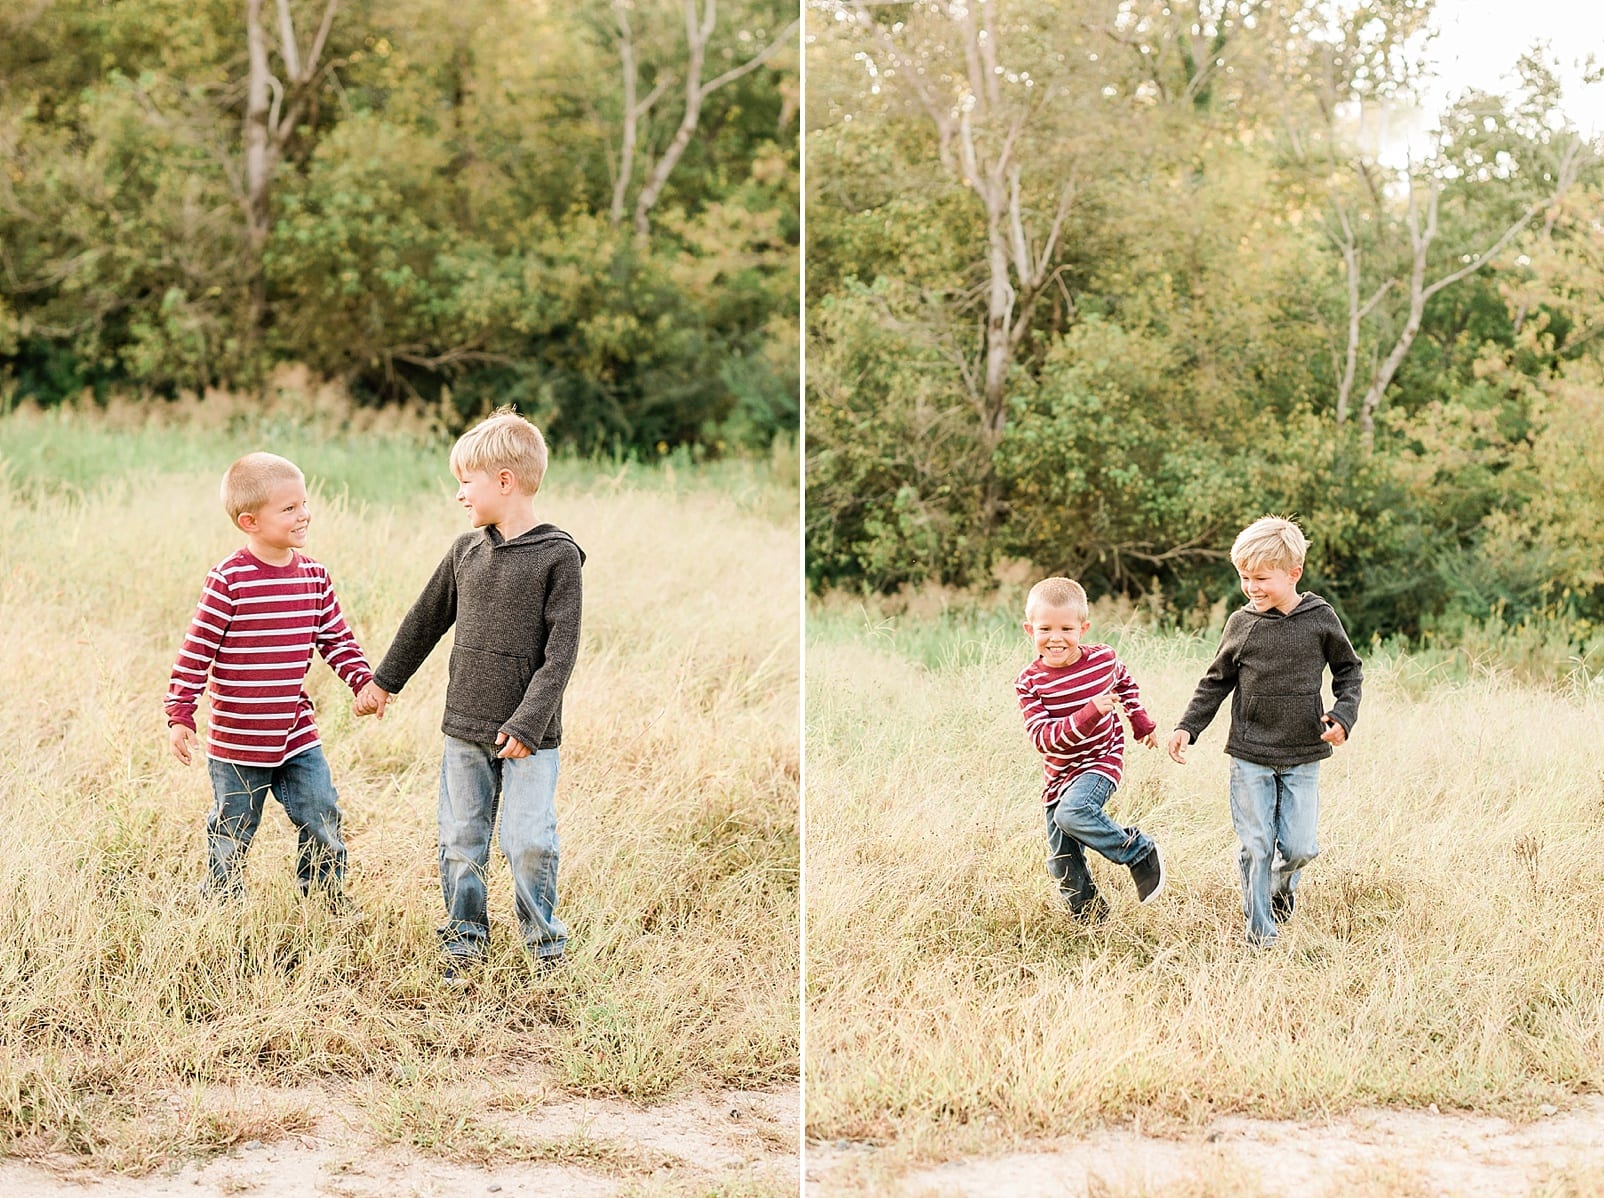 Raleigh boys running and playing together in a field photo